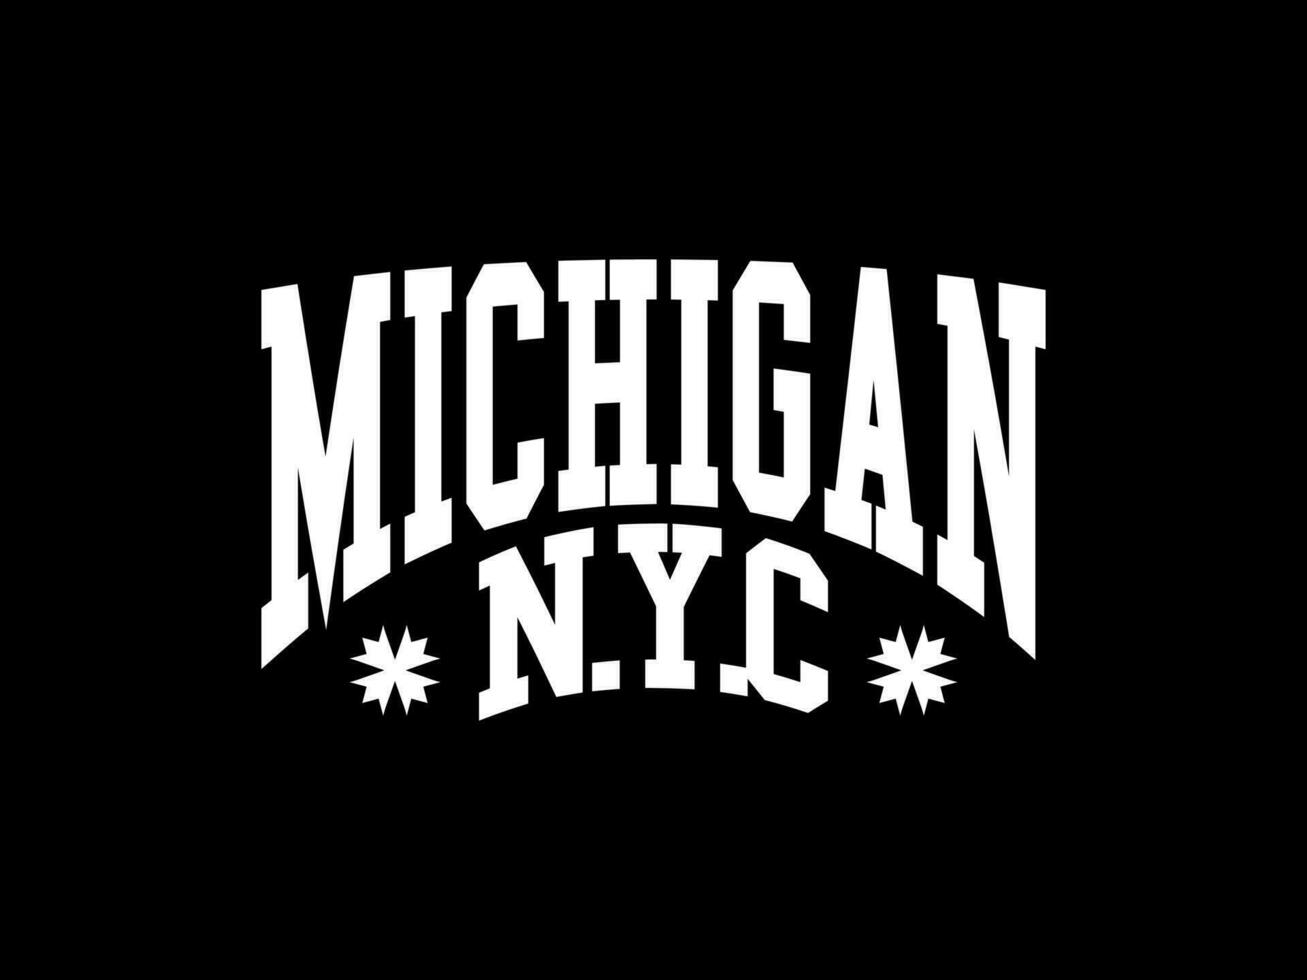 Streetwear clothing Michigan typography vector template graphic tees ready for print